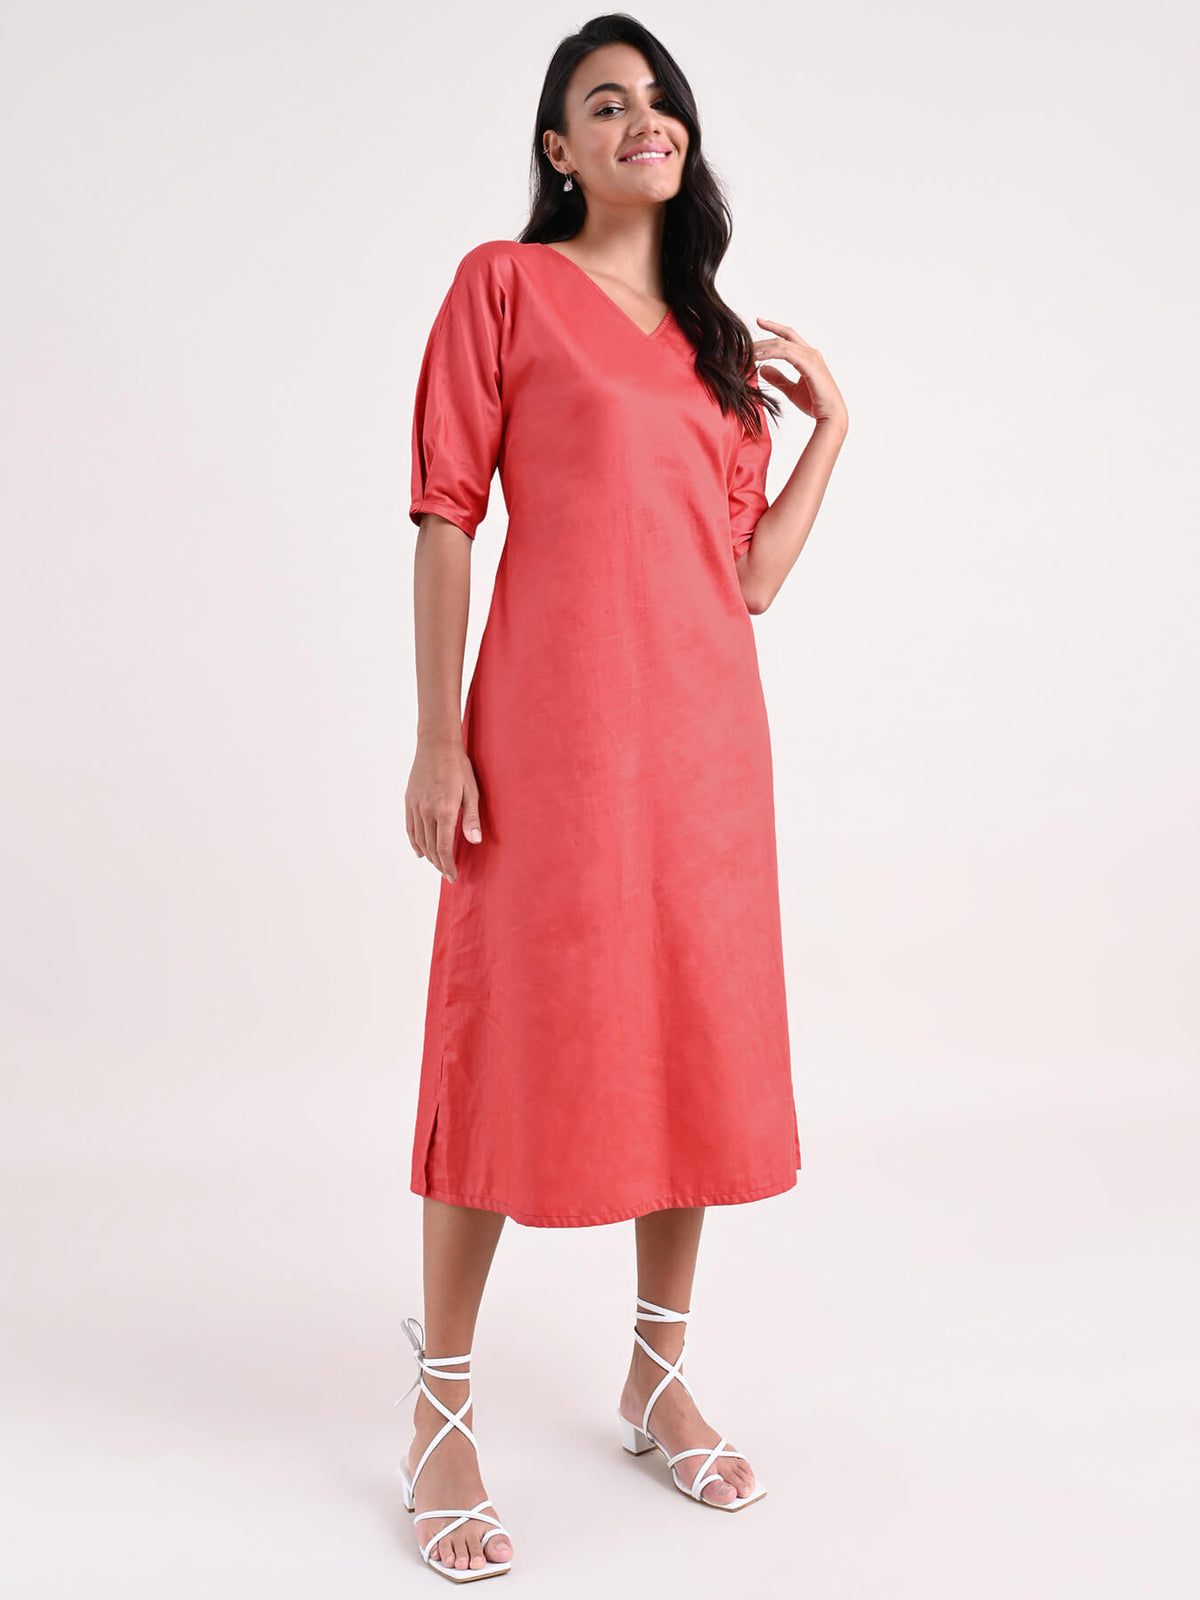 Cotton A Line Dress - Coral Red